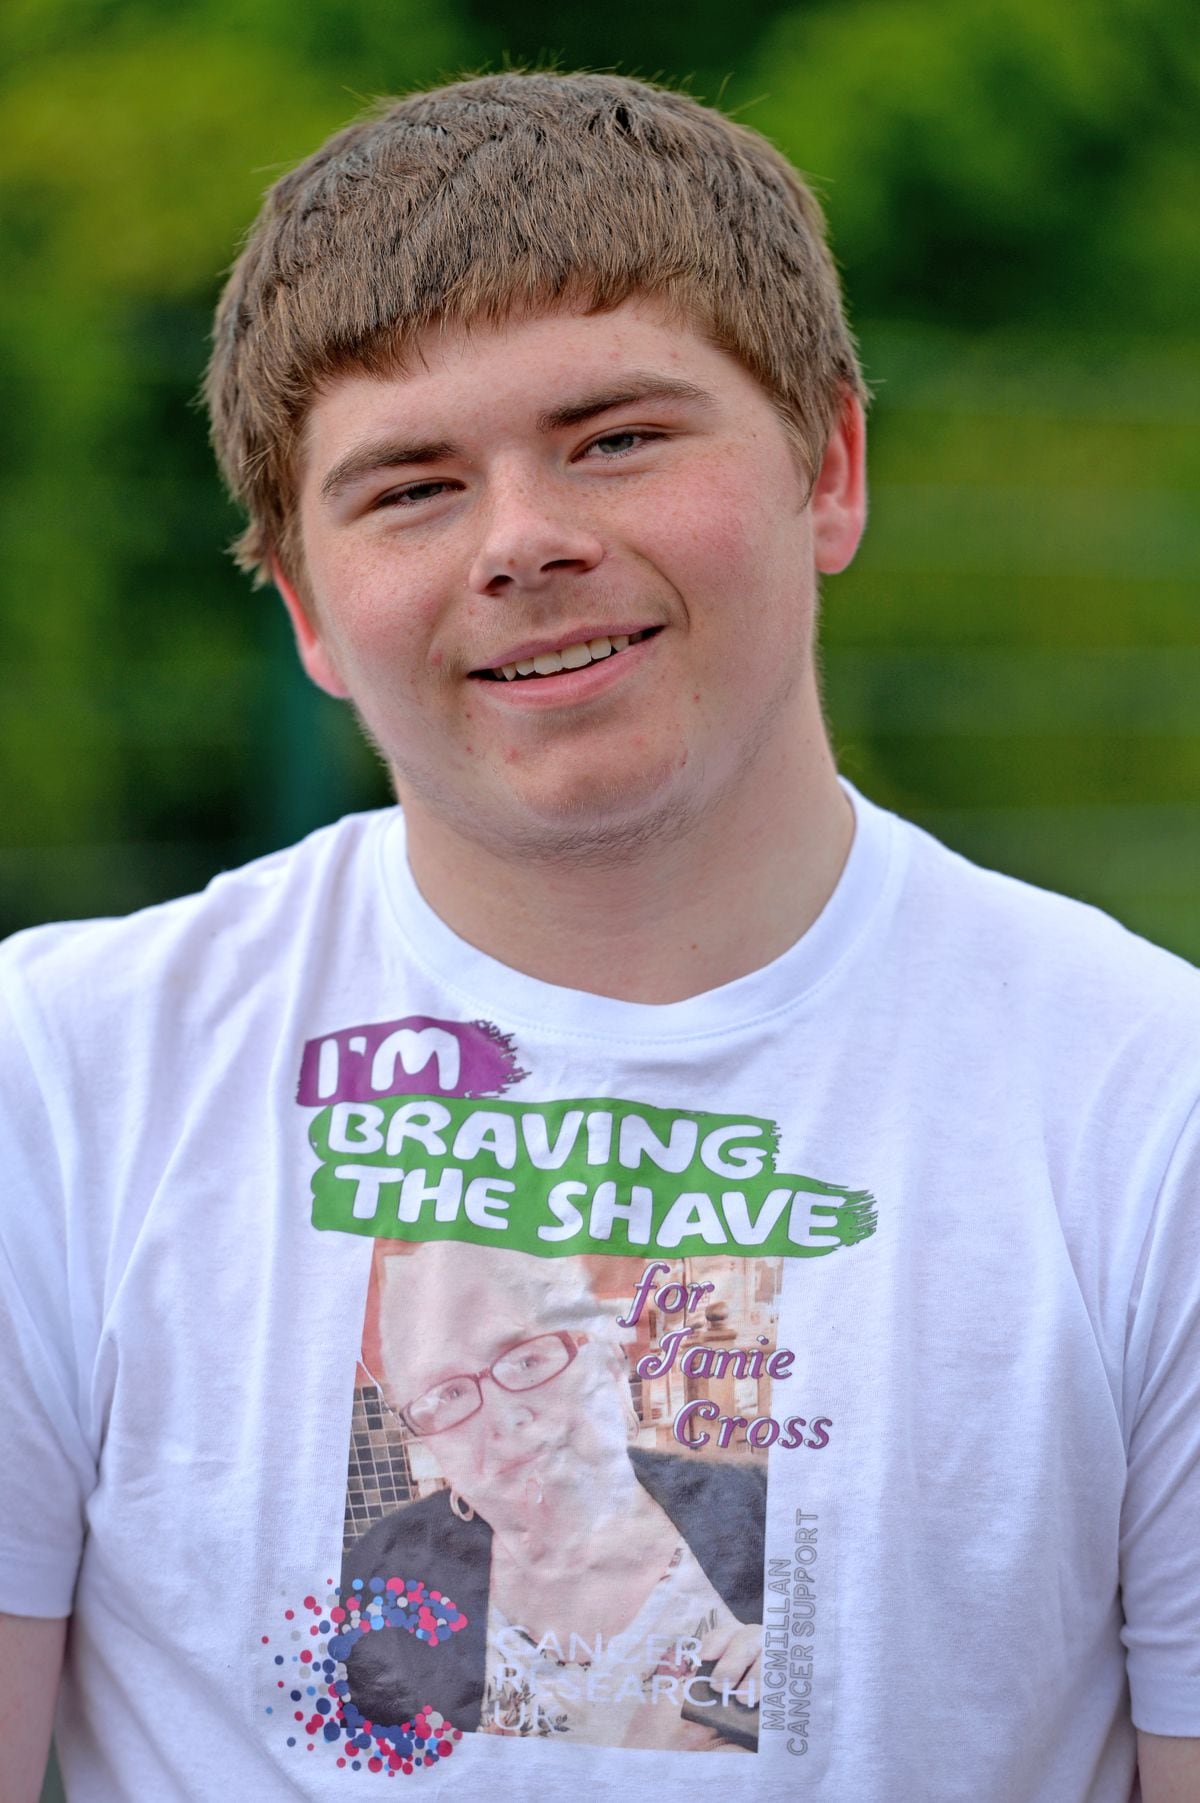 Alfie Whitticase chose to shave his hair off in memory of a family friend who died of cancer